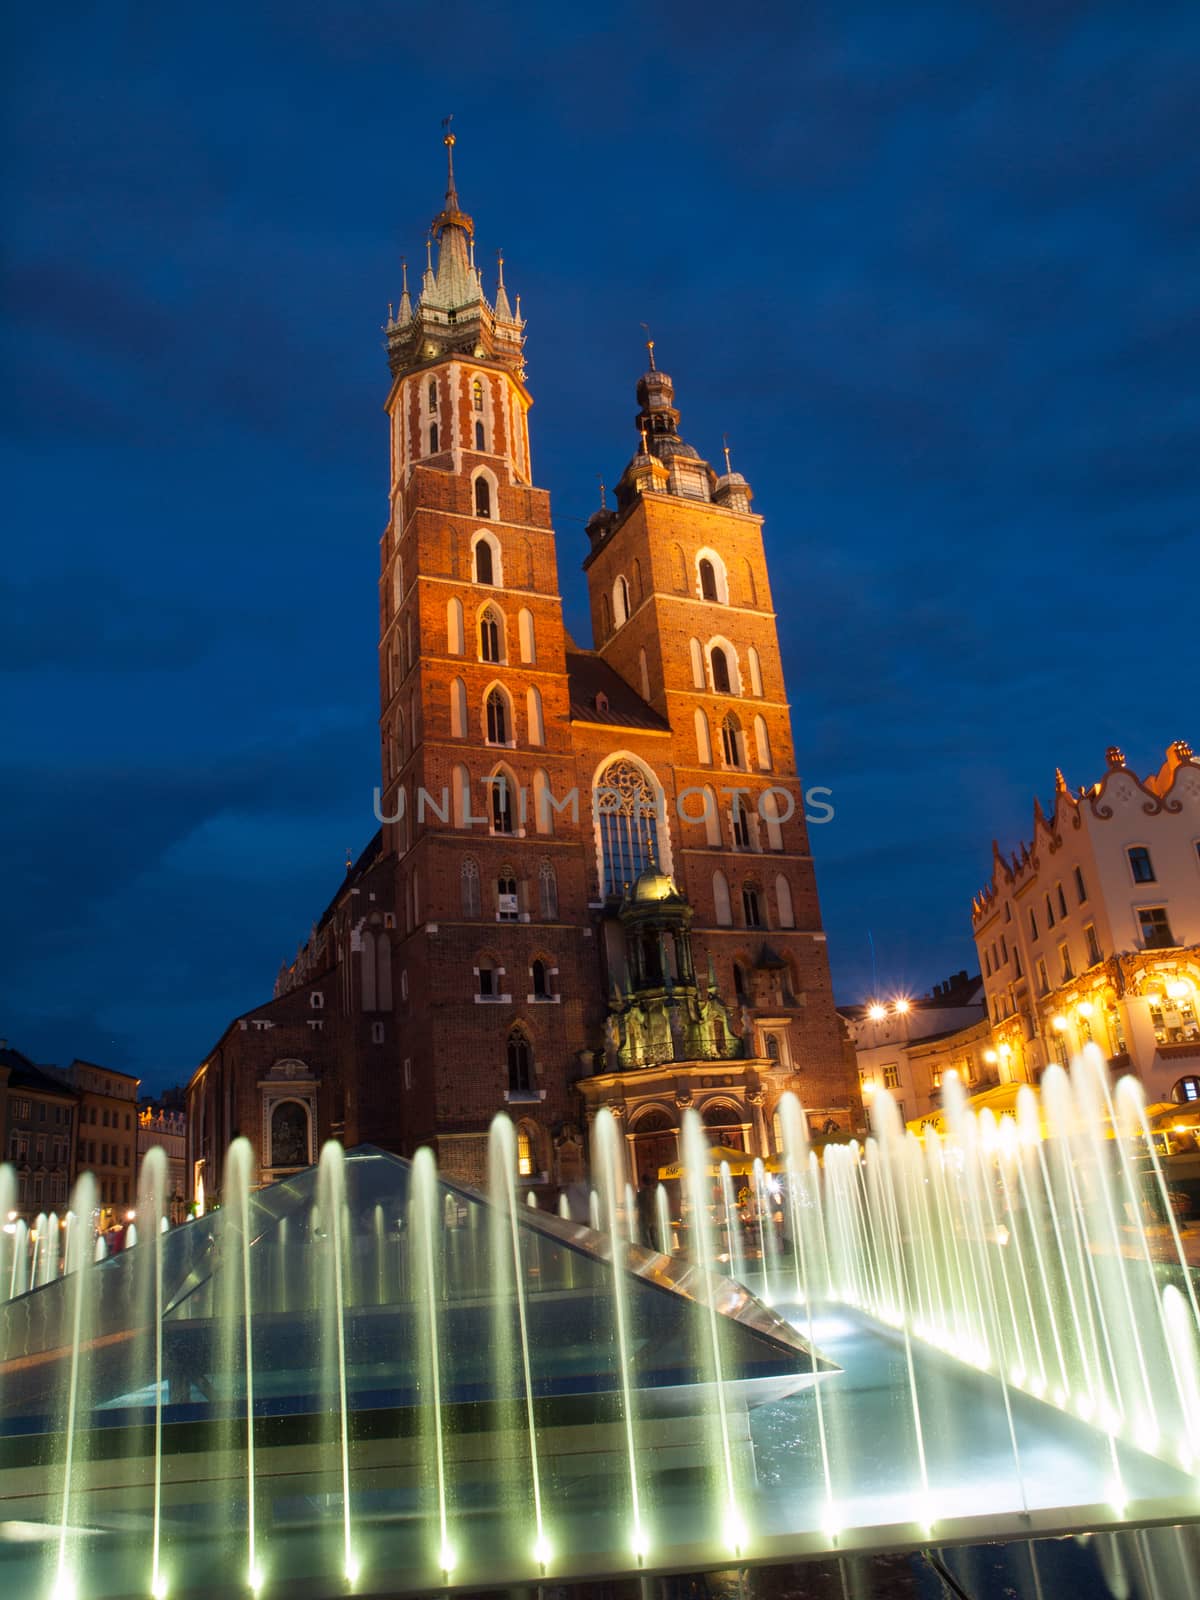 St. Mary's Church in Krakow by night by pyty